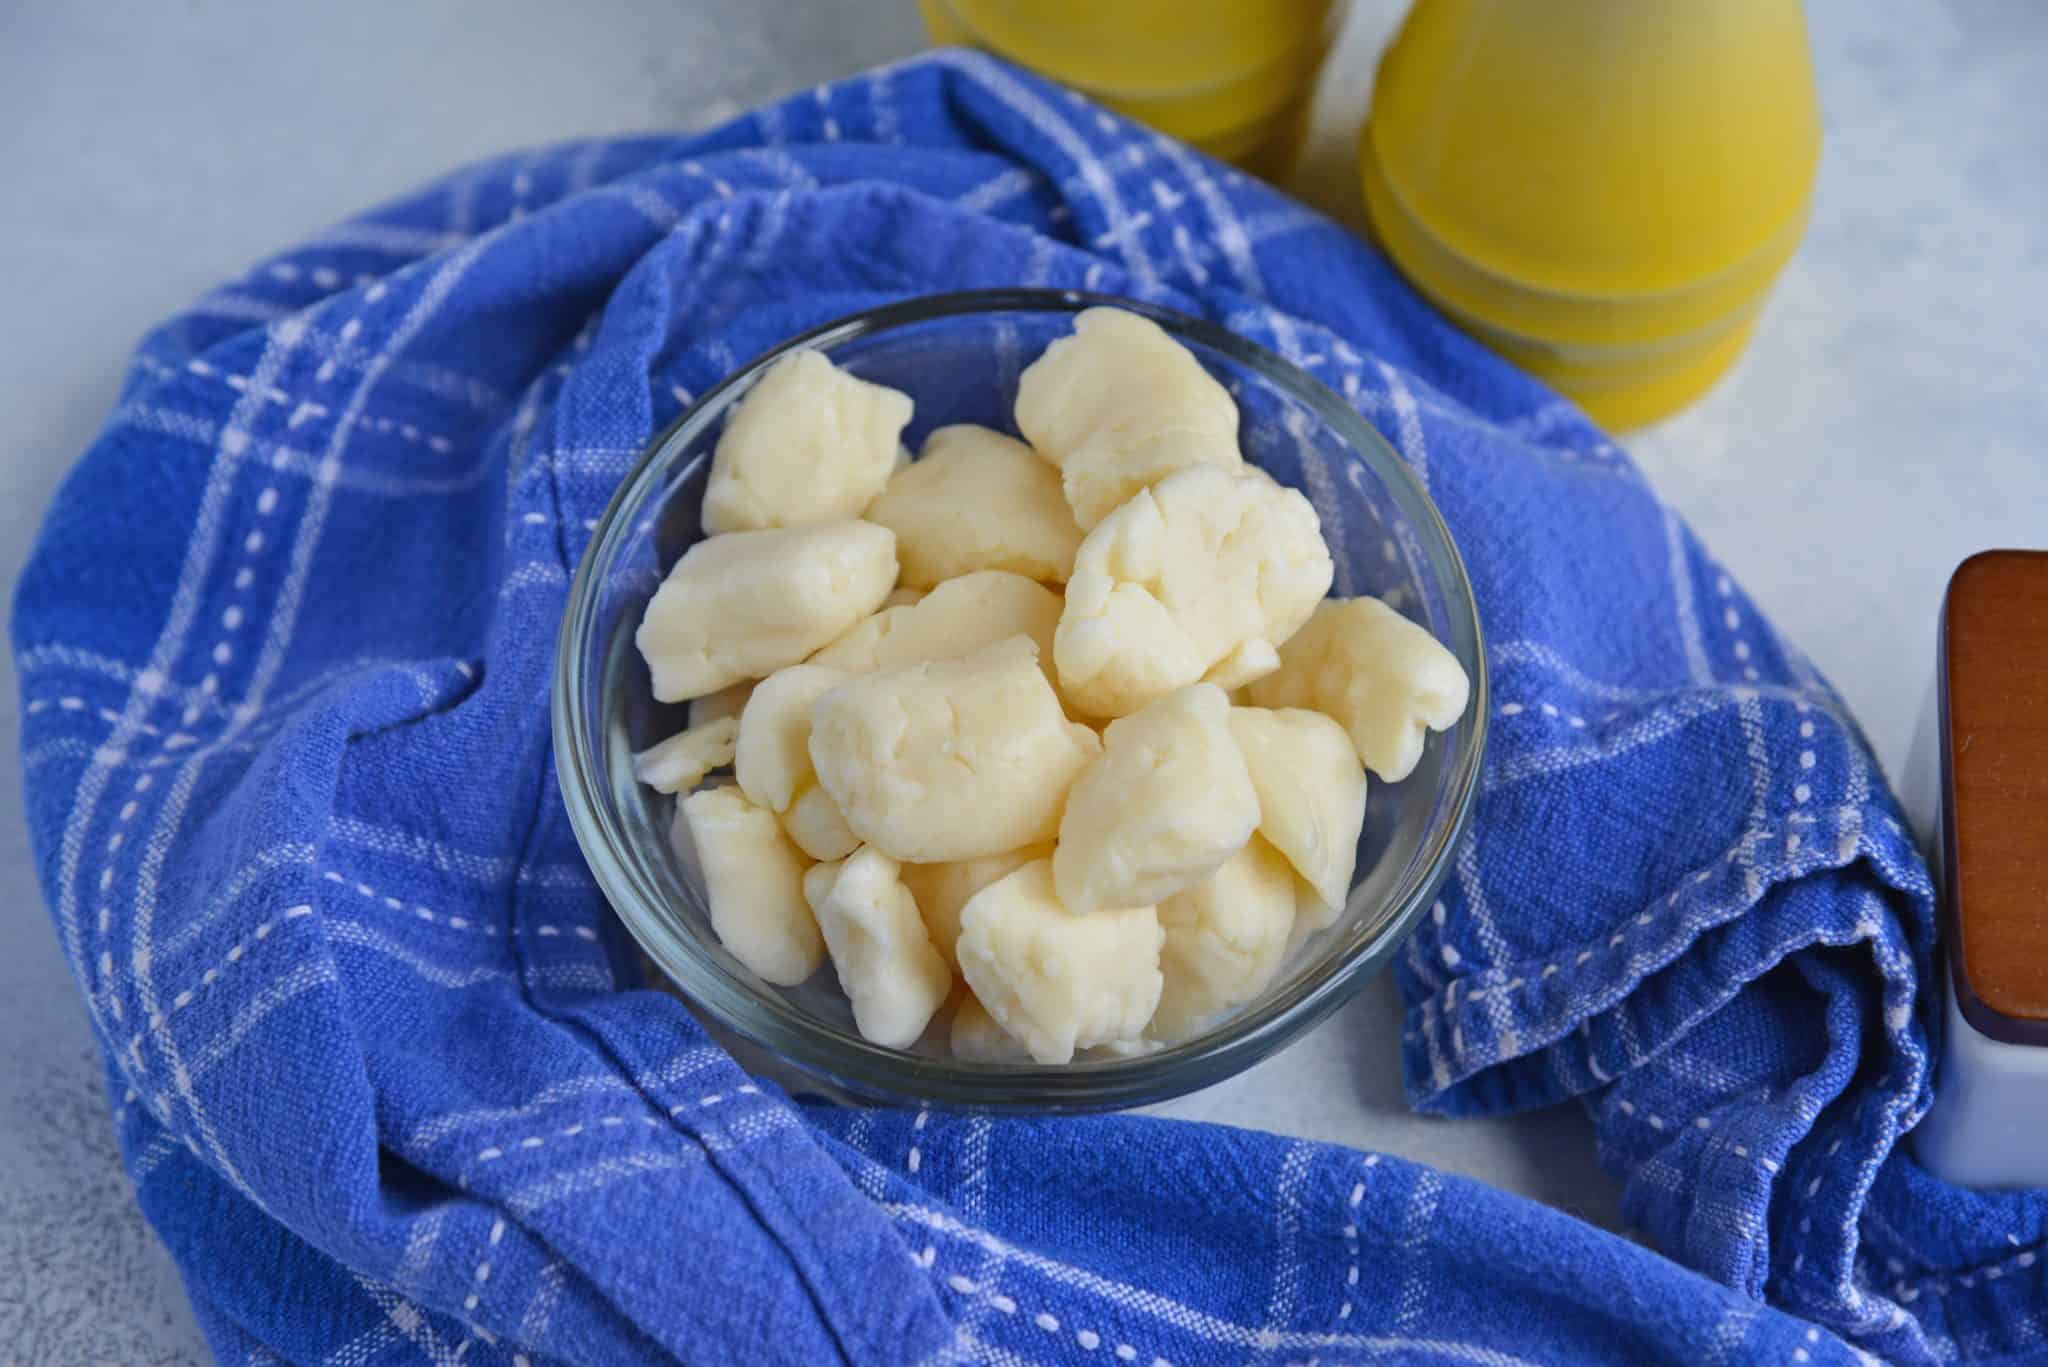 What are cheese curds?